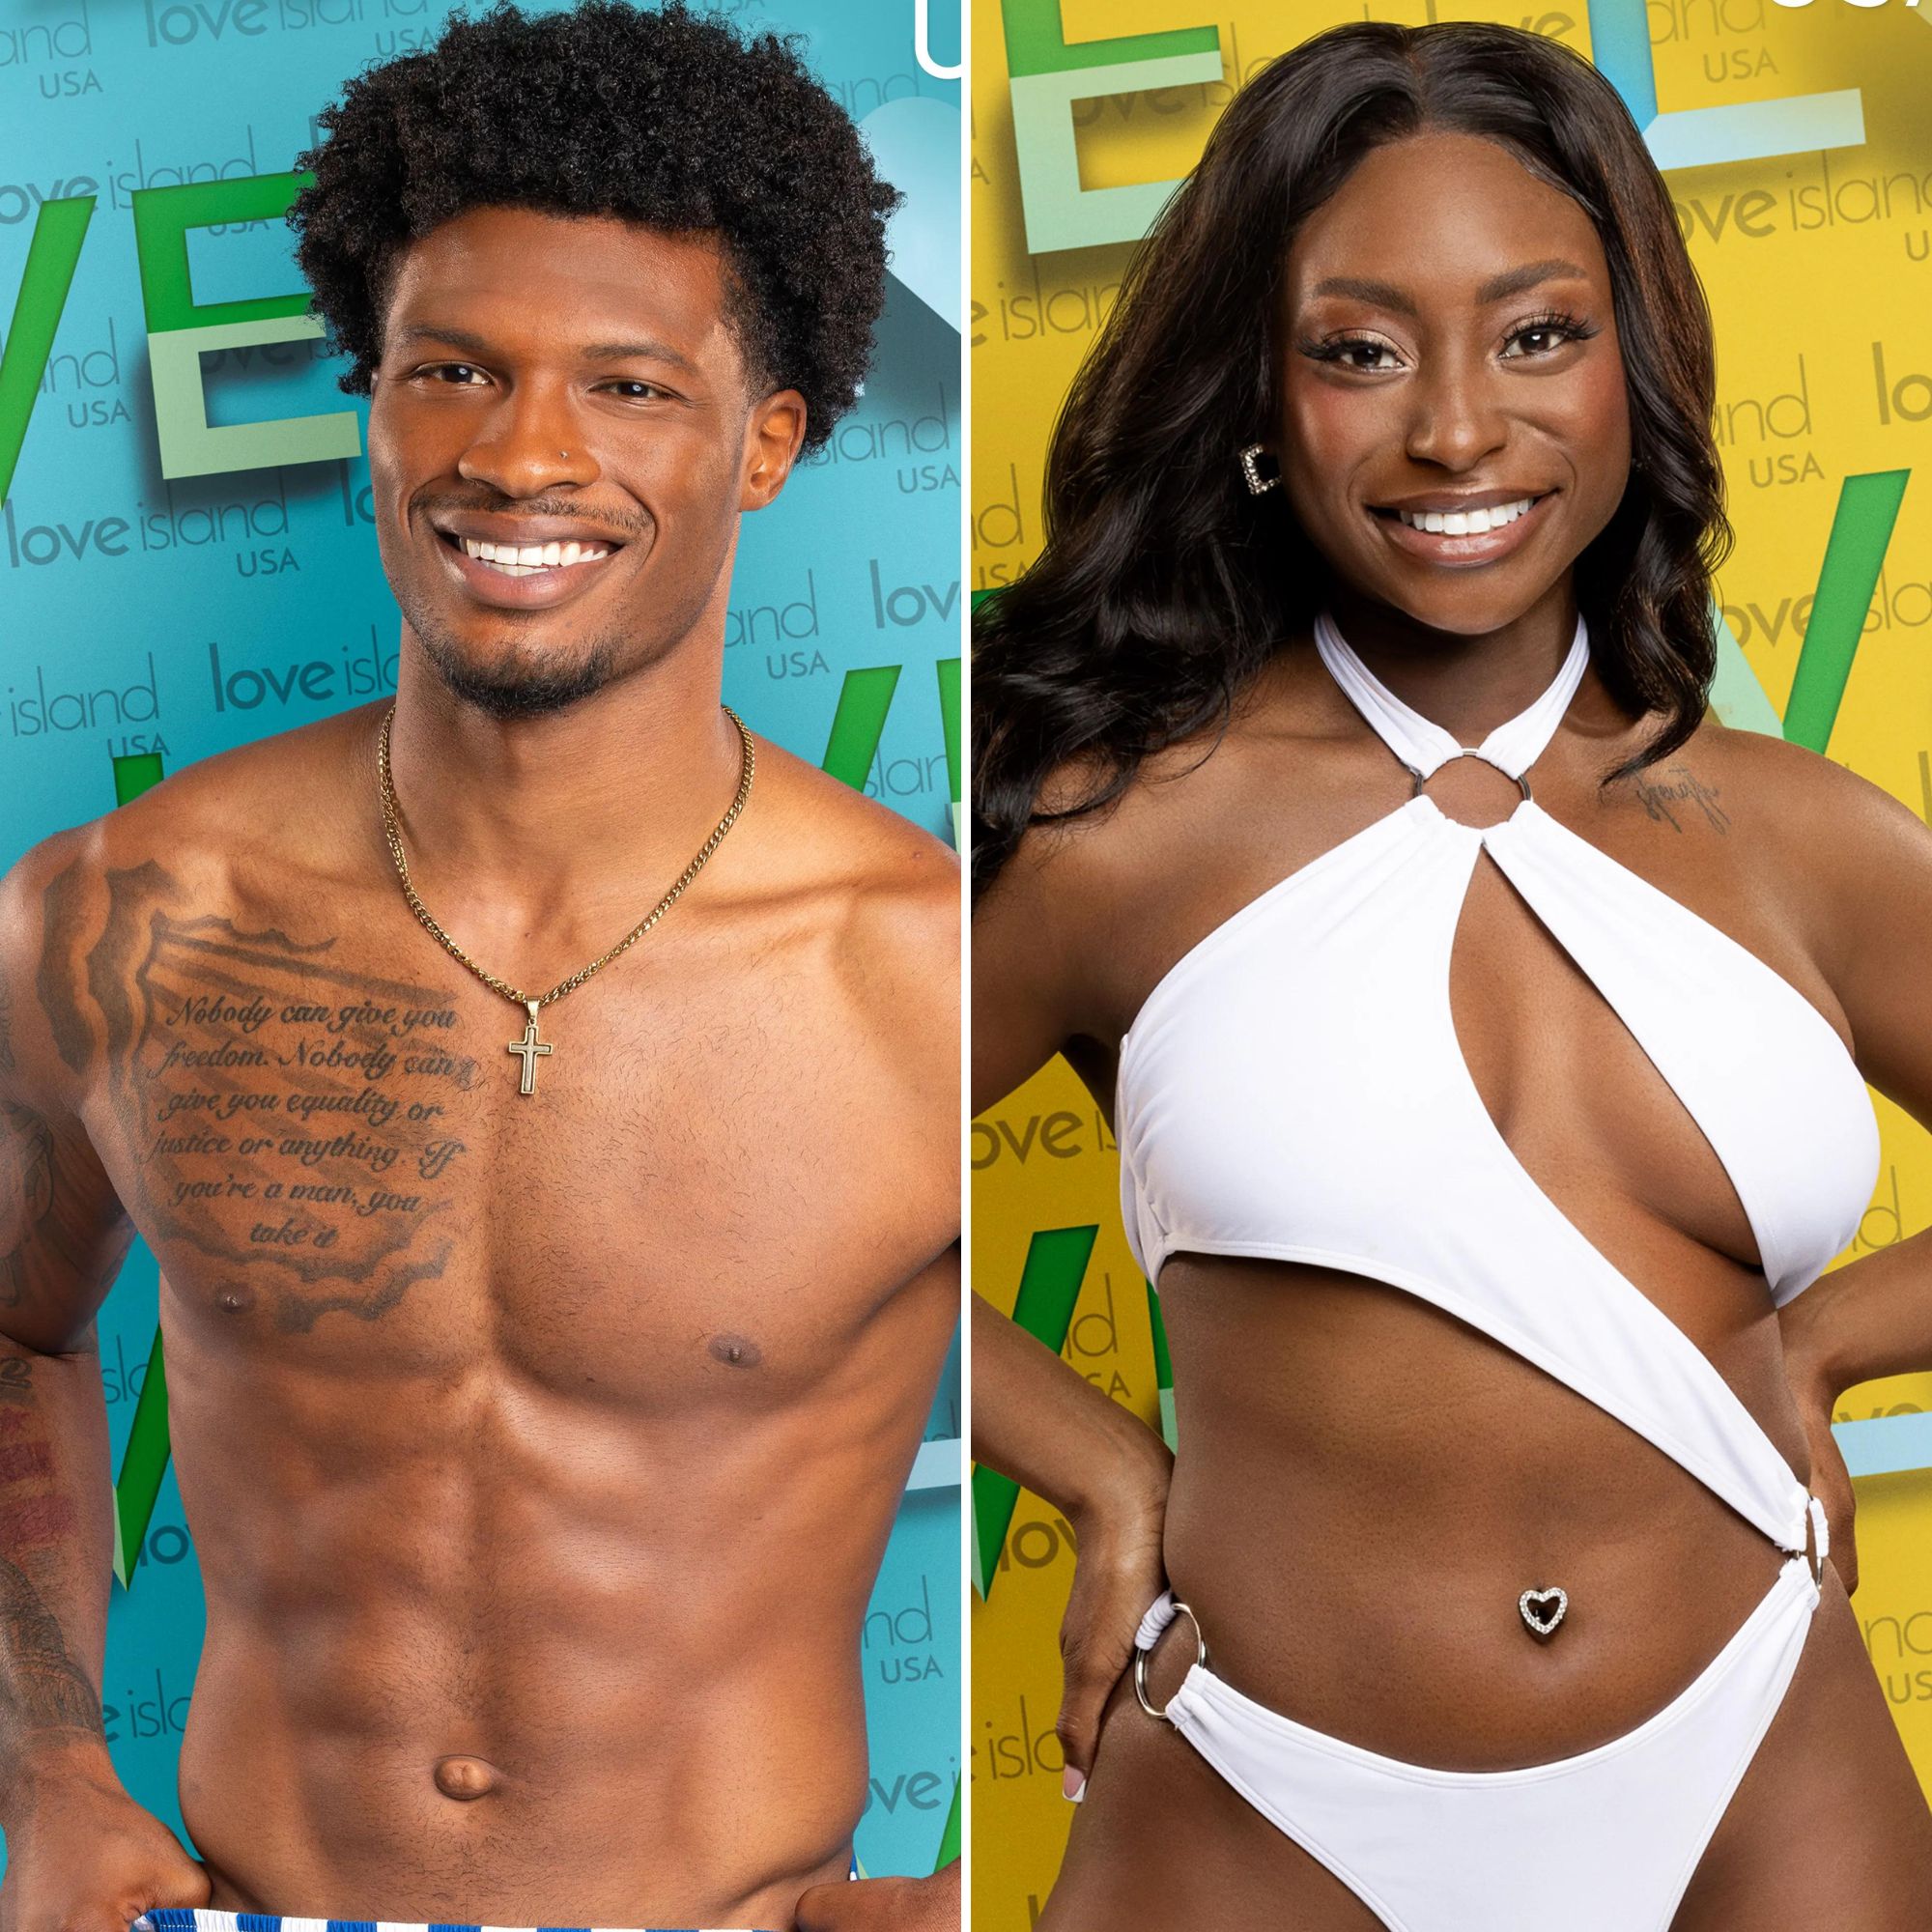 Love Island U.S.A. Are Keenan and Kay Kay Still Together?